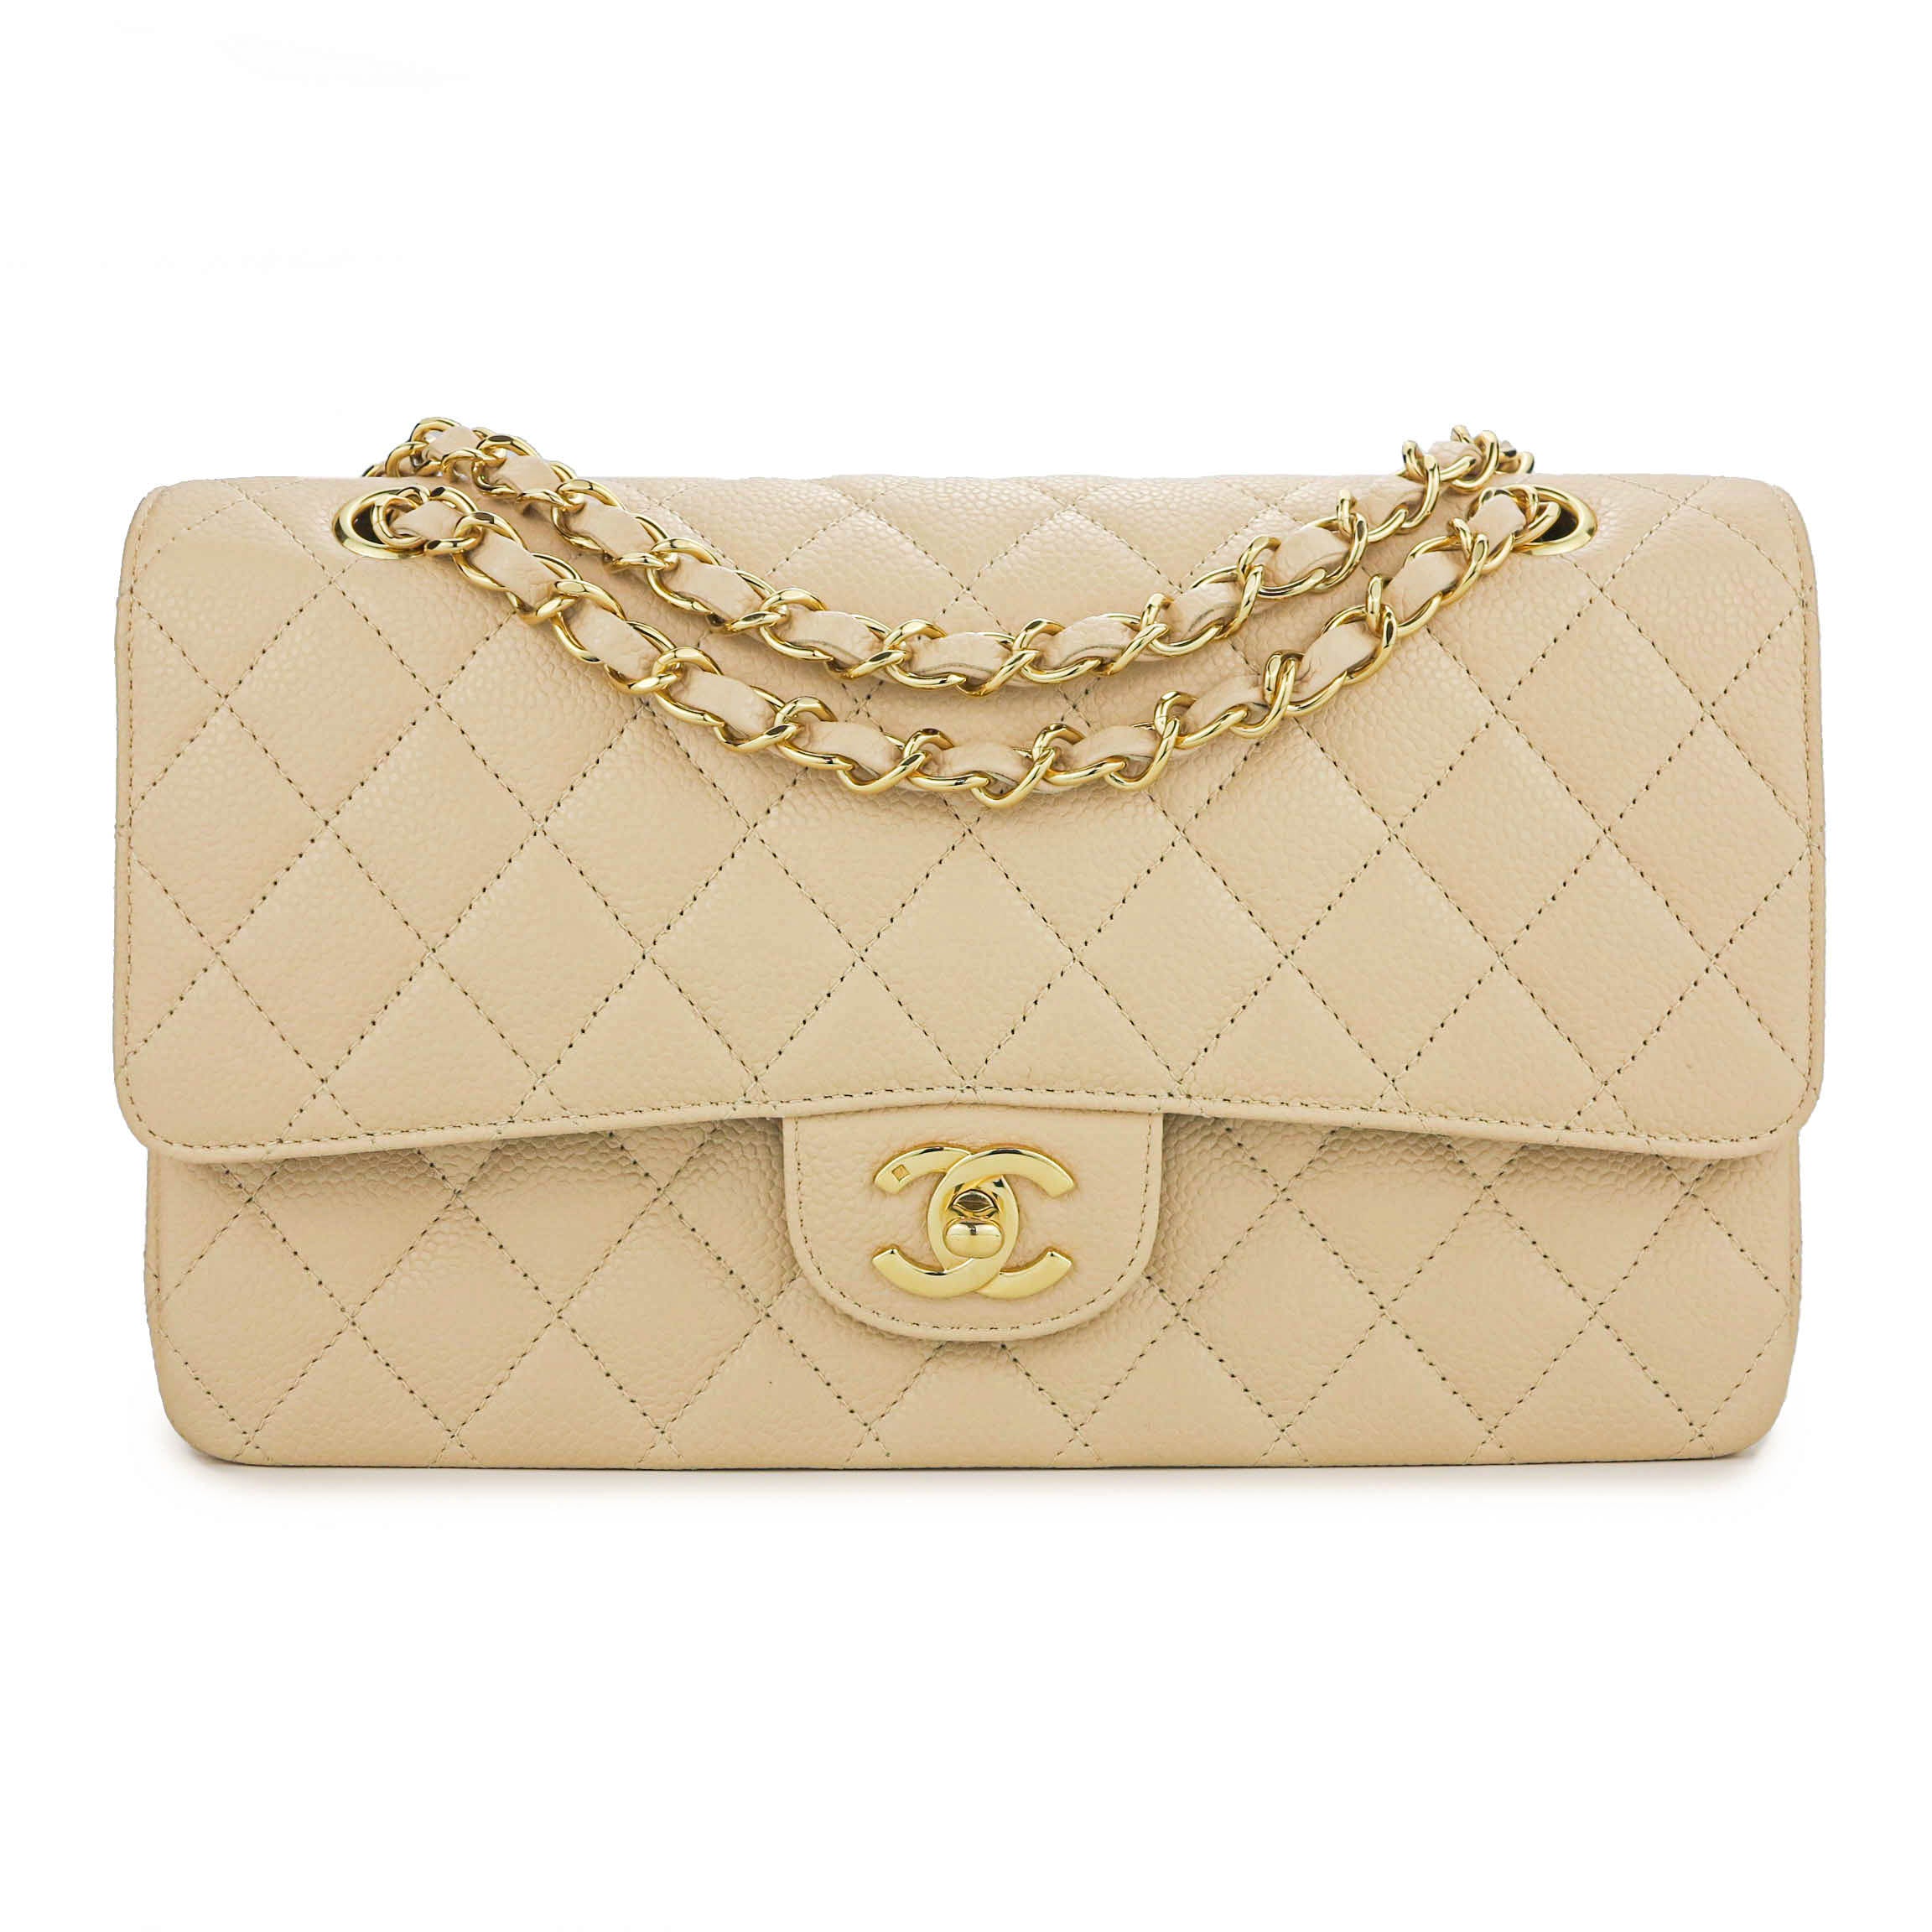 Exclusive SALE: Beige Clair Caviar Quilted Flap Bag